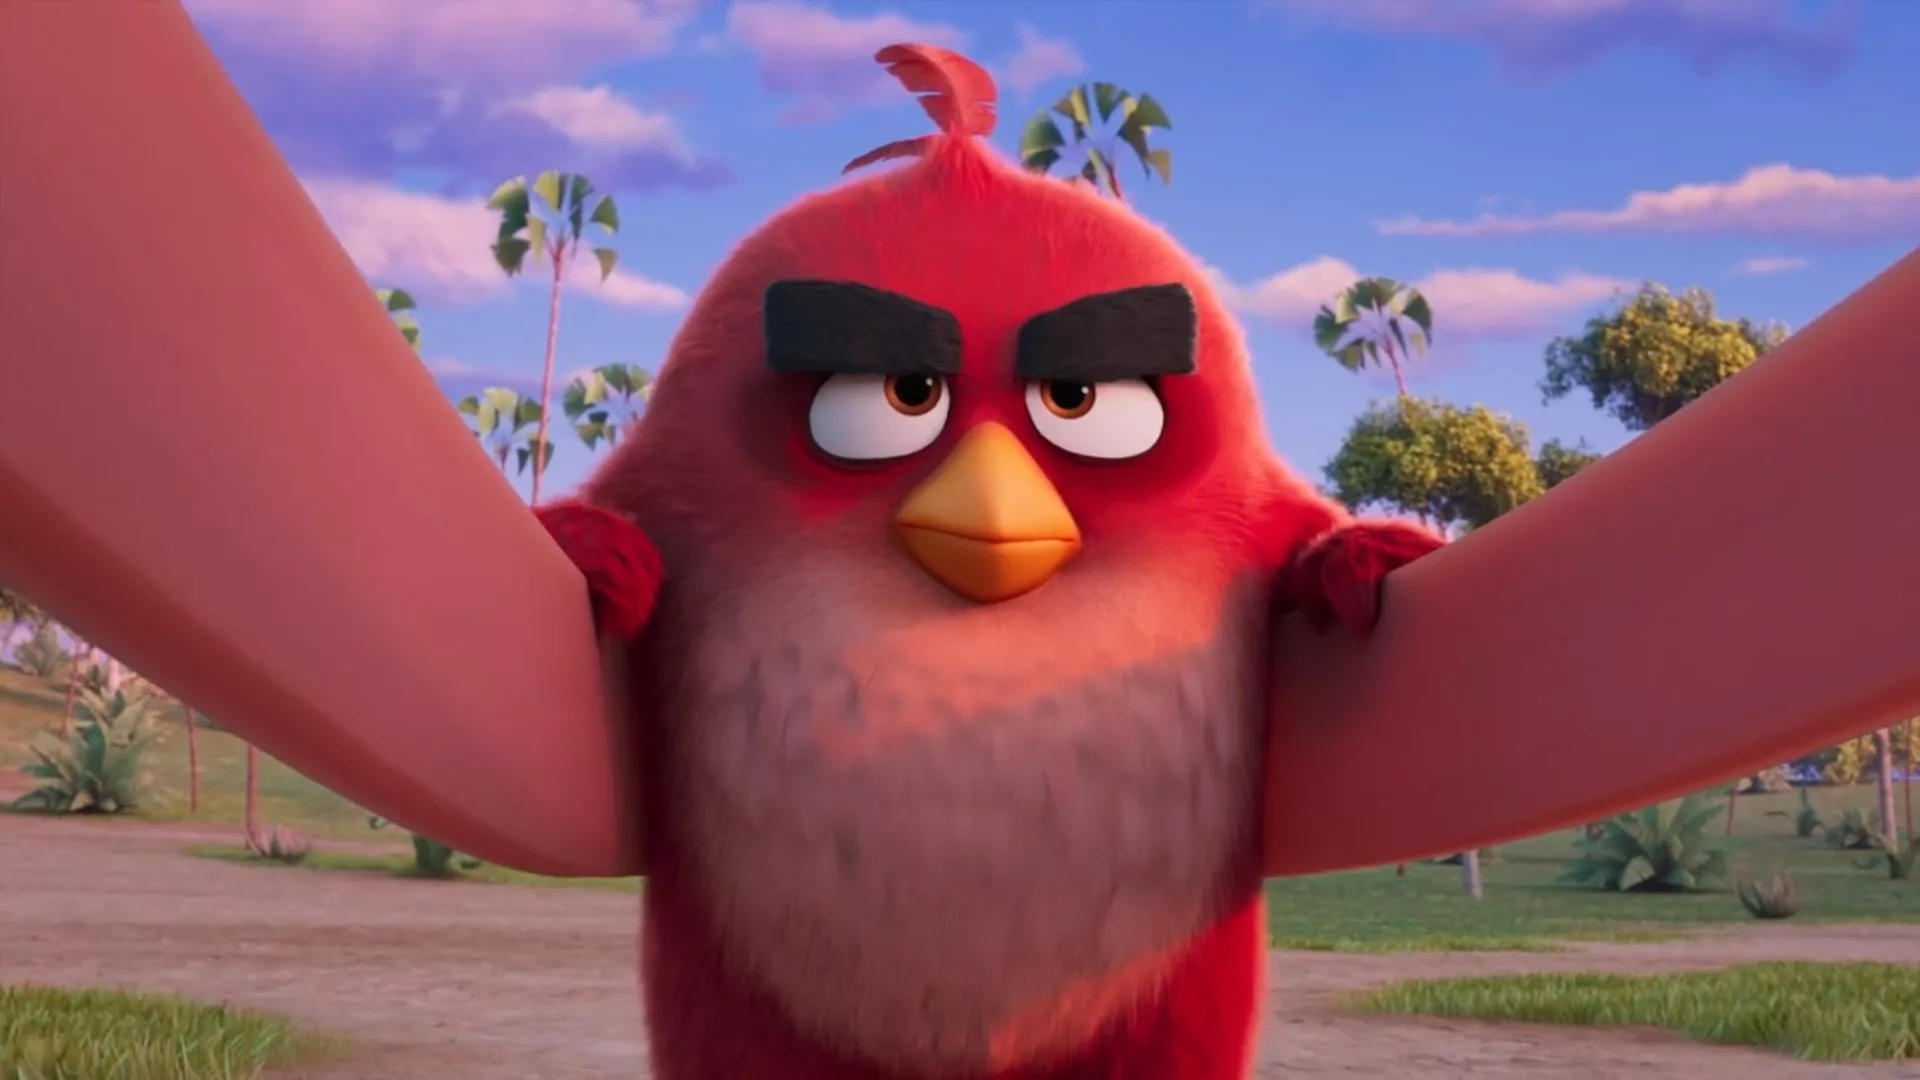 angry-birds-3-movie-production-has-just-begun-cover6661ca1519056-jpg